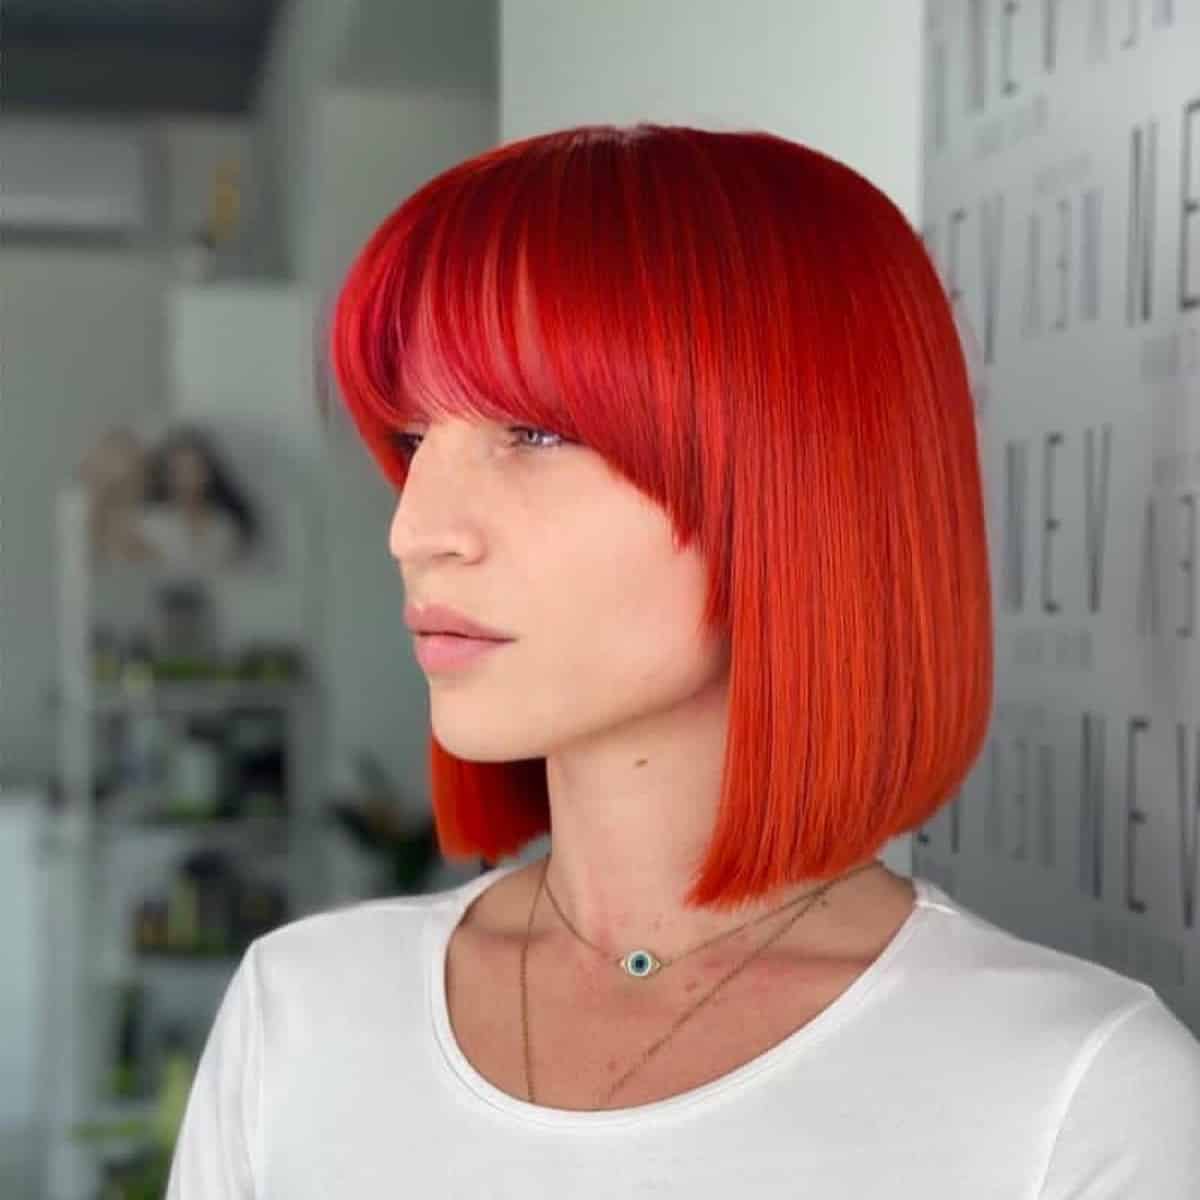 These 17 blunt bob haircuts are trending right now